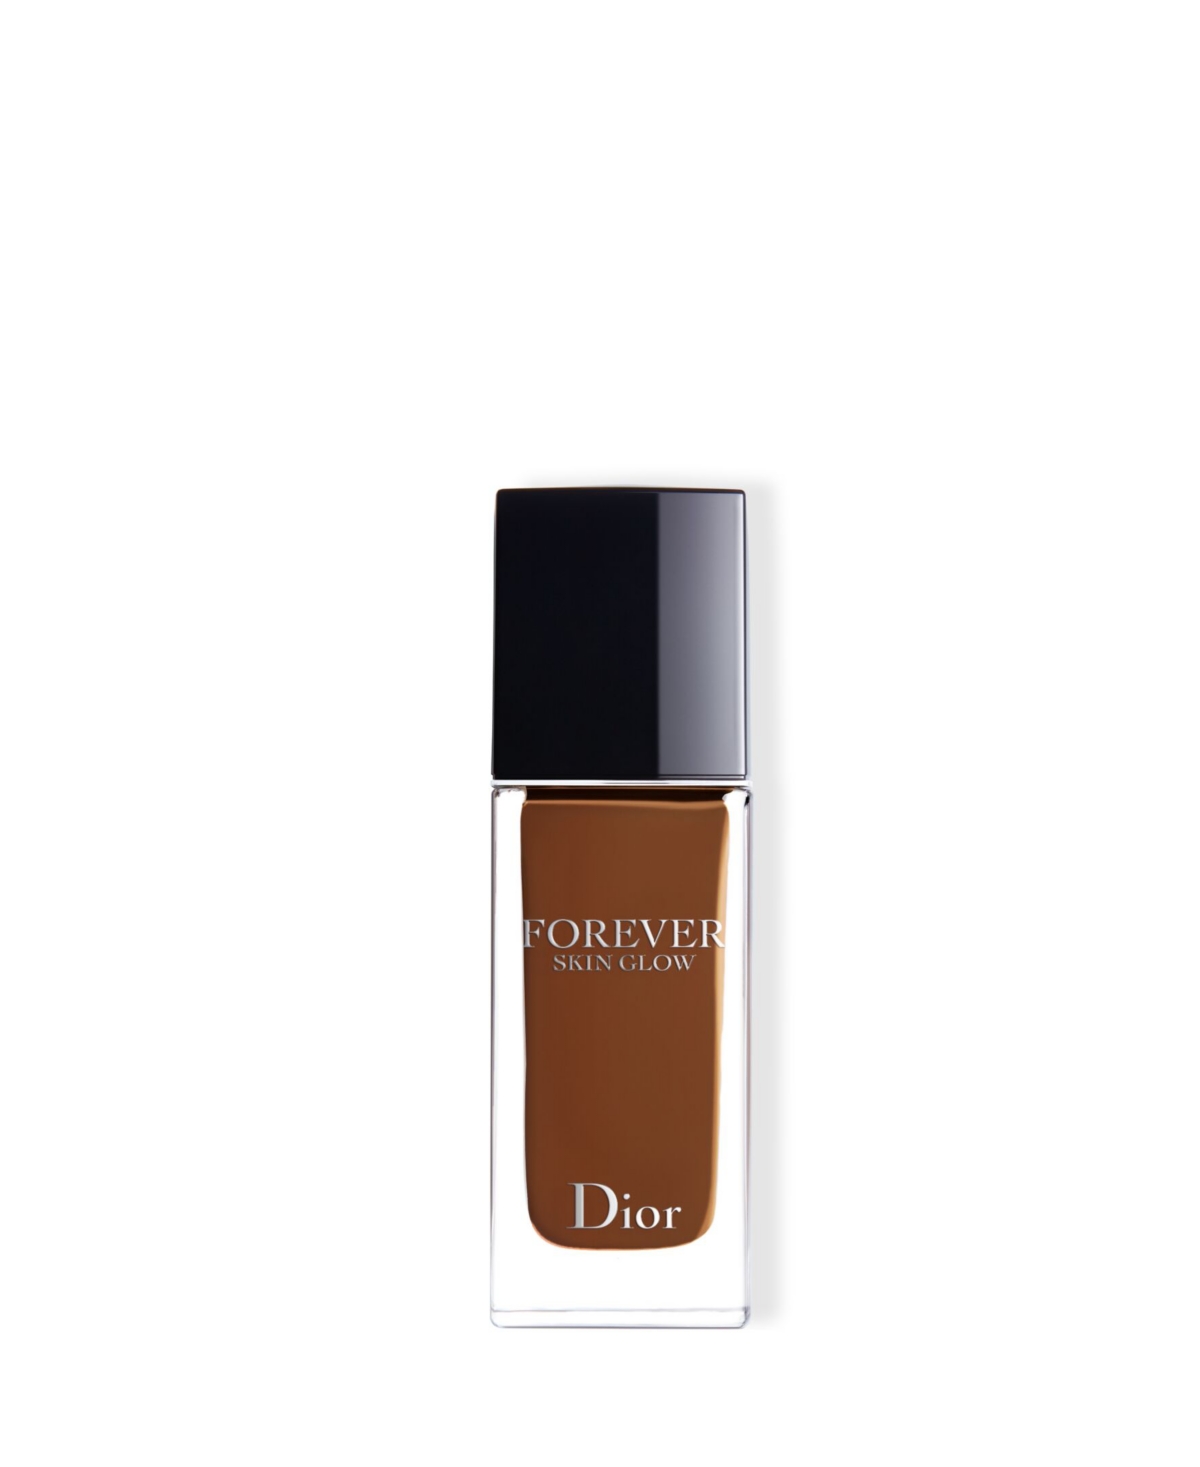 Dior Forever Skin Glow Hydrating Foundation Spf 15 In Neutral (deep Skin With Neutral Underton